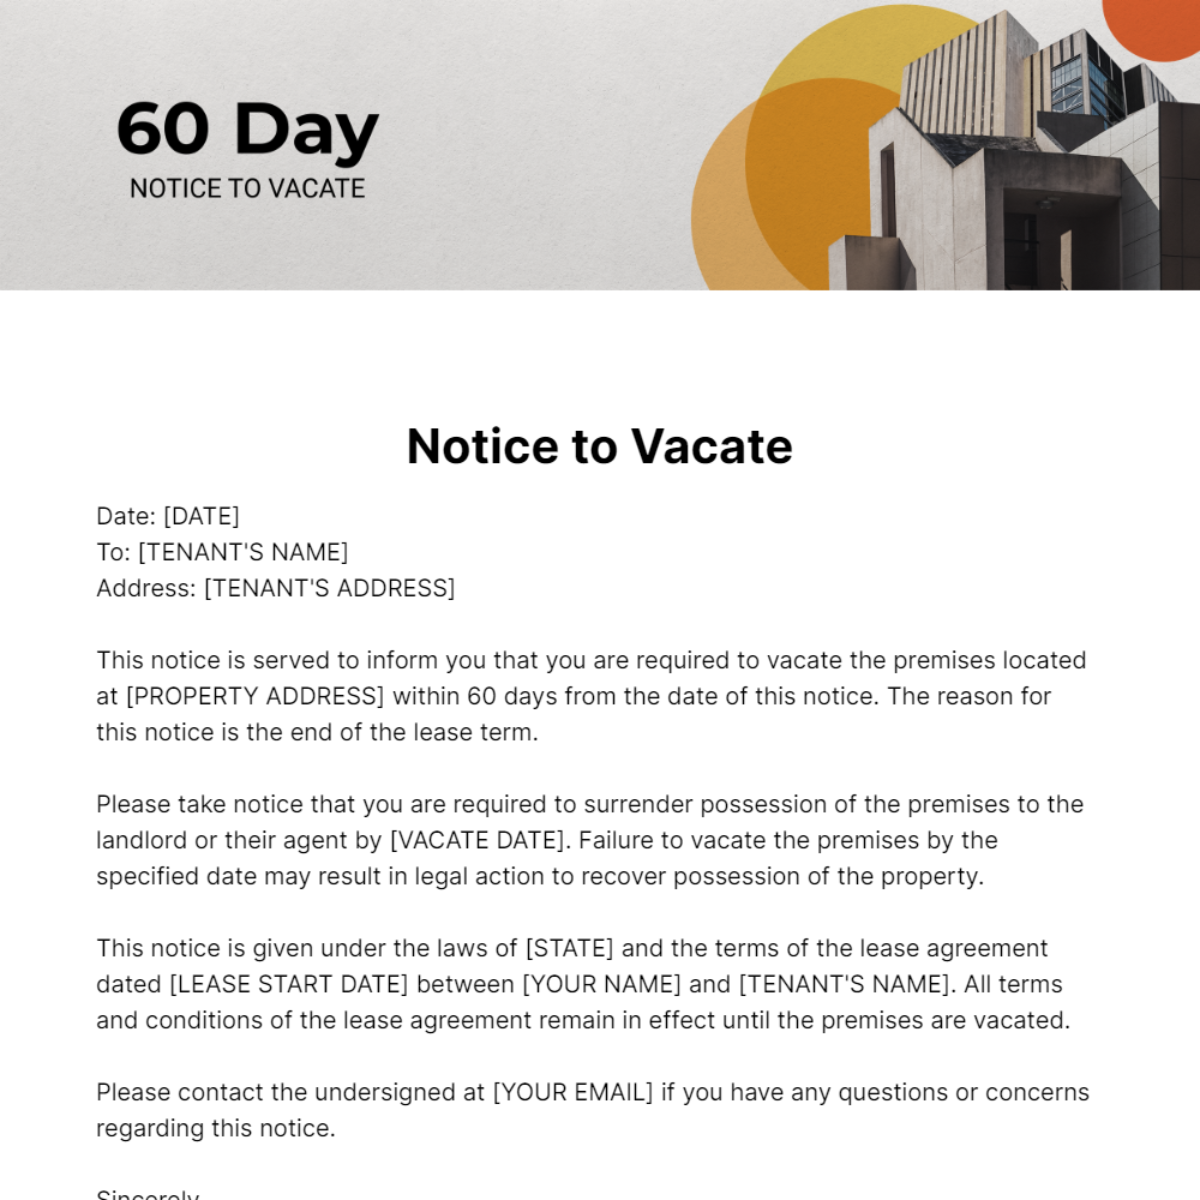 60 Day Notice To Vacate Template